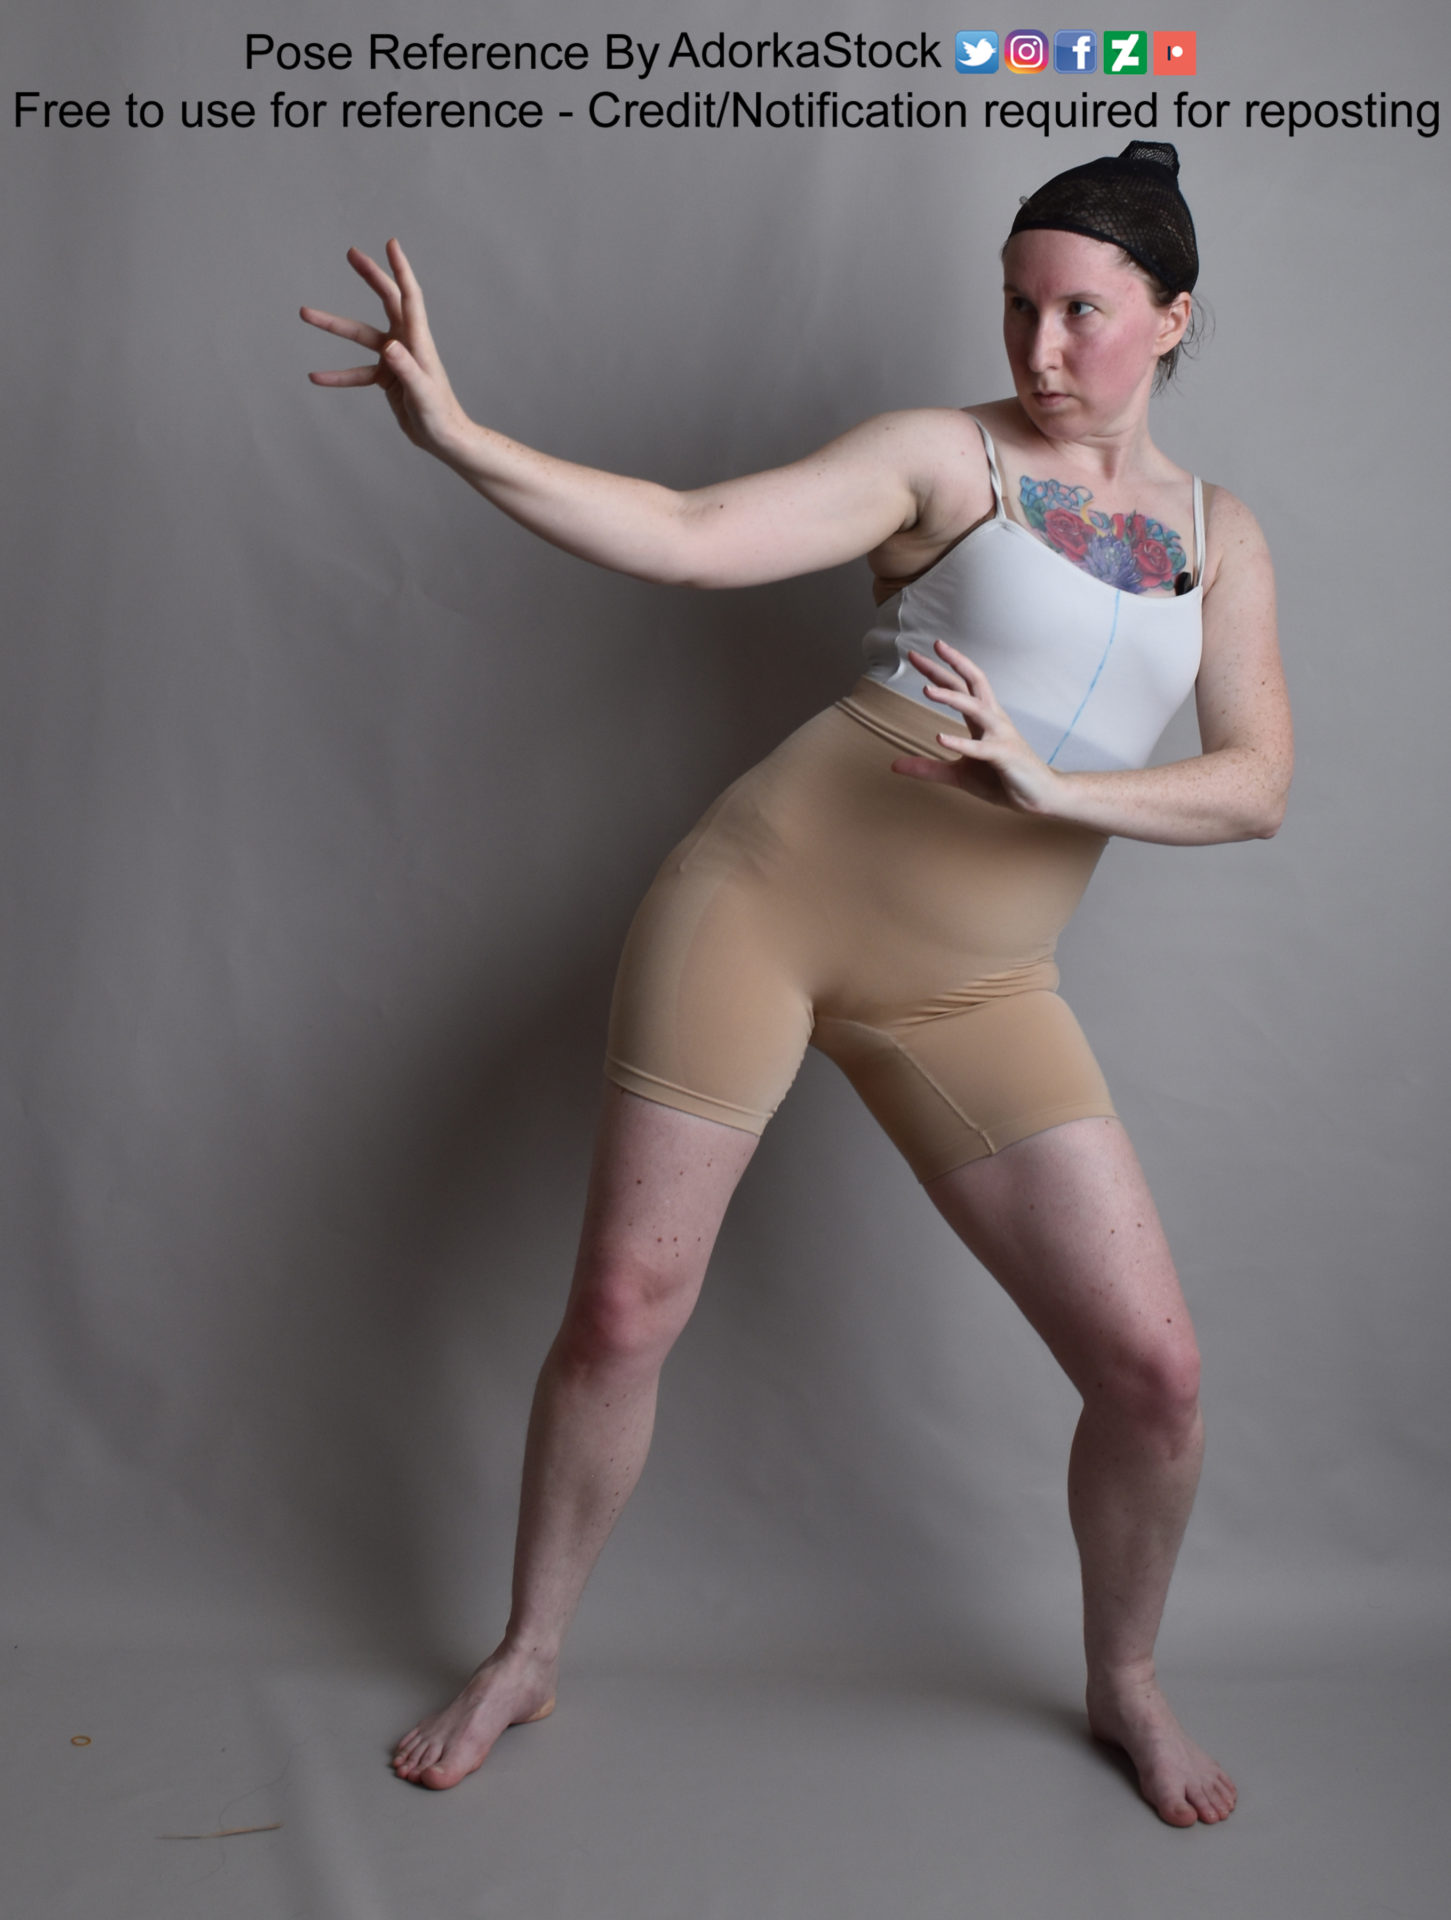 thin, white, female pose reference model in a slight lunge with arms gesturing to the side as if casting magic